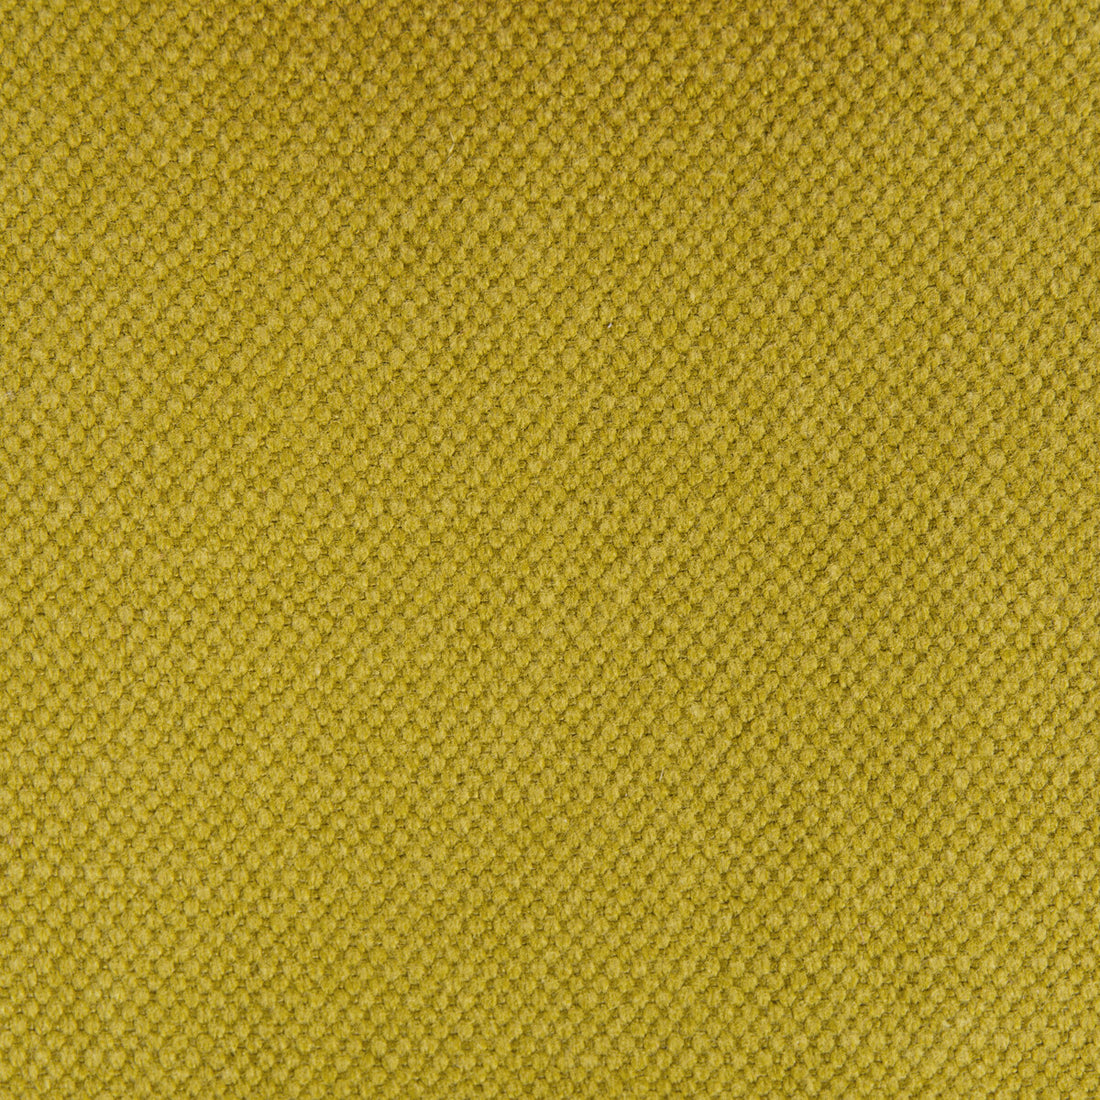 Lima fabric in aceite color - pattern GDT5616.012.0 - by Gaston y Daniela in the Gaston Nuevo Mundo collection